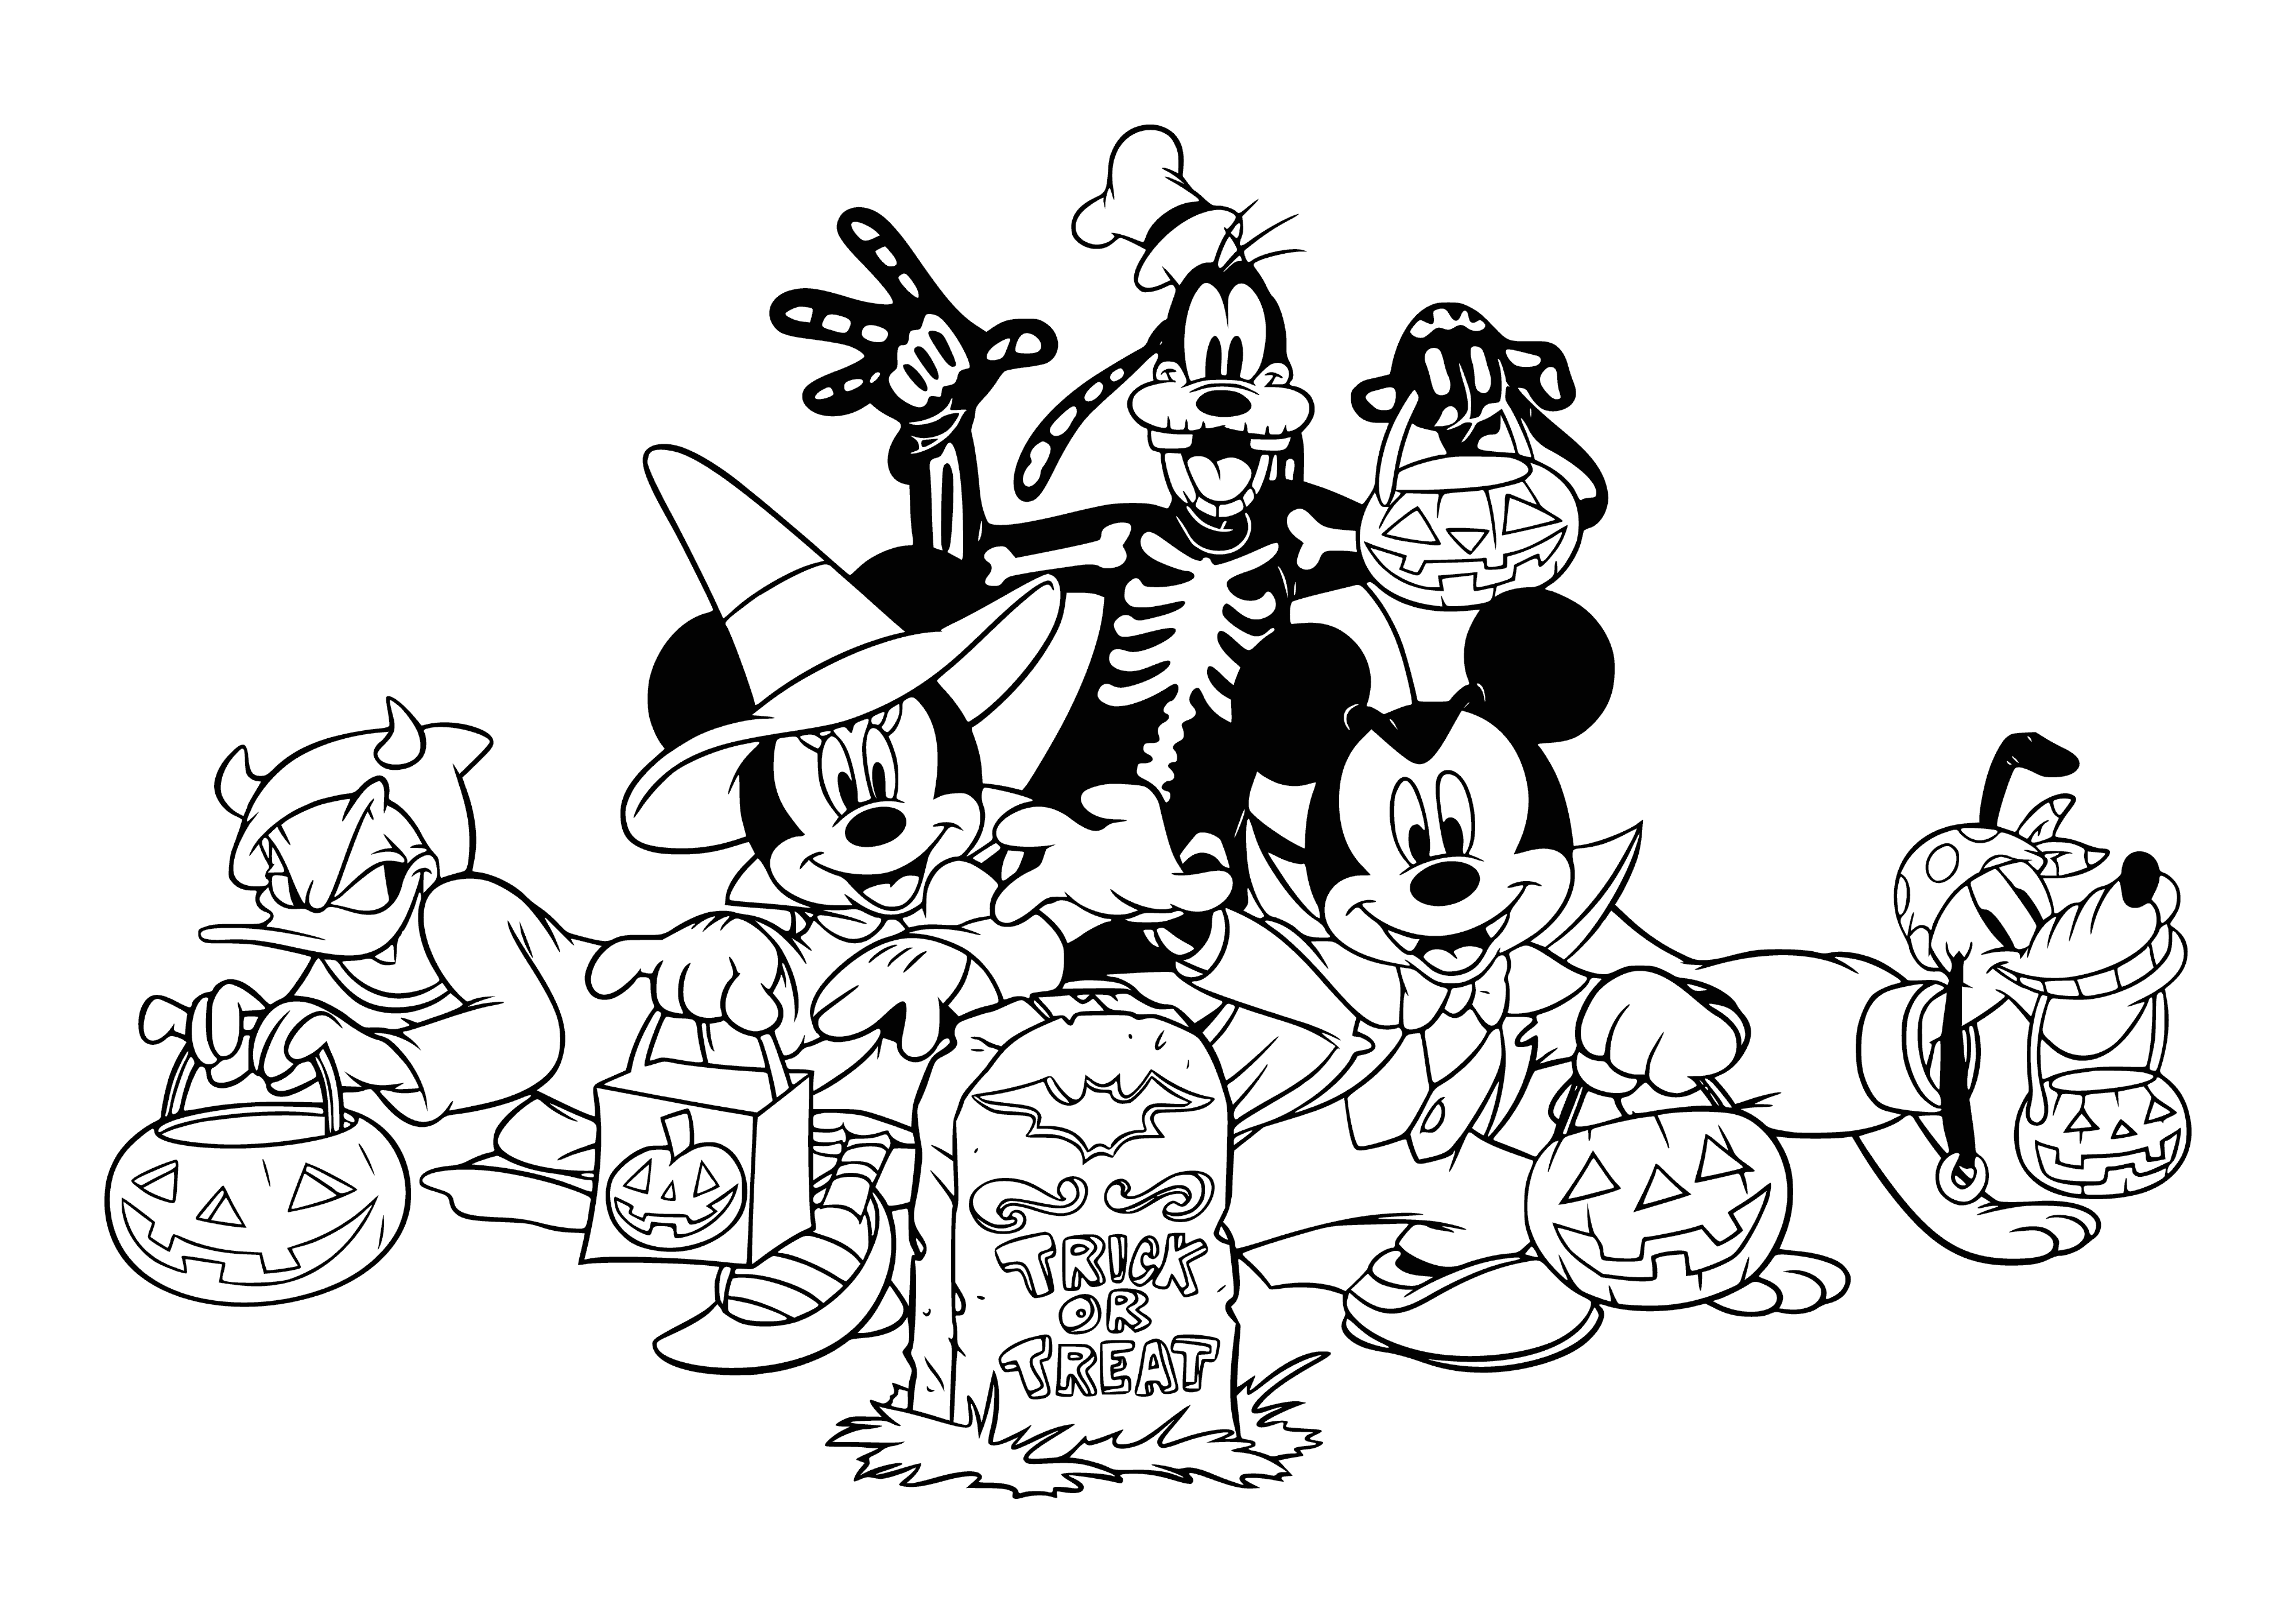 coloring page: Disney characters in Halloween costumes: Mickey in pumpkin suit, Donald a witch, Goofy a ghost, Pete vampire, Chip a skeleton, Dale a scarecrow. "Happy Halloween!" banner at the top. #DisneyHalloween #HalloweenCostume